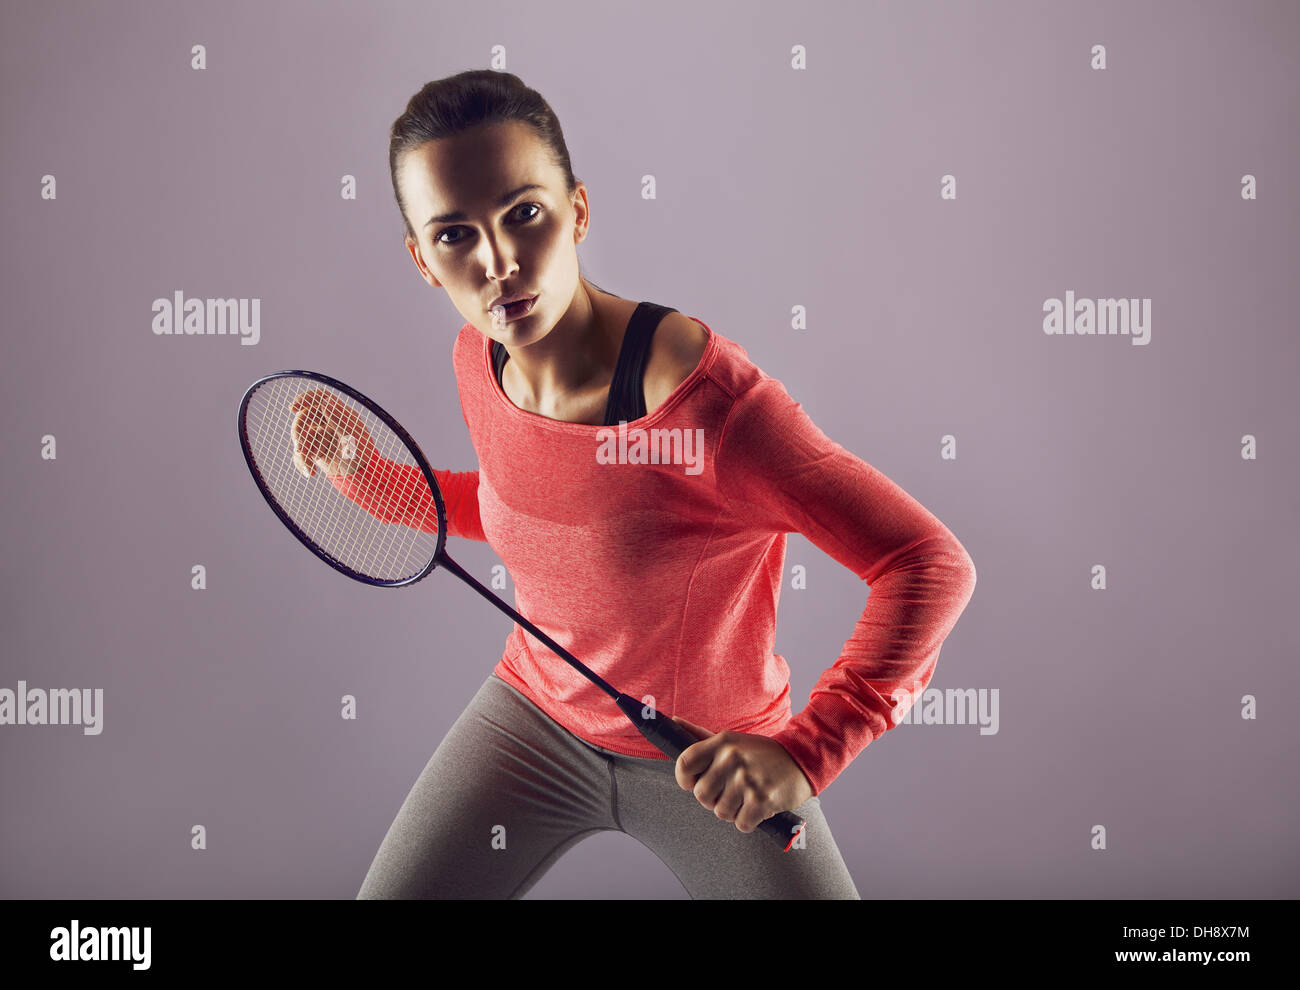 Beautiful girl holding badminton racket playing against grey background. Female sports person badminton player looking at camera Stock Photo